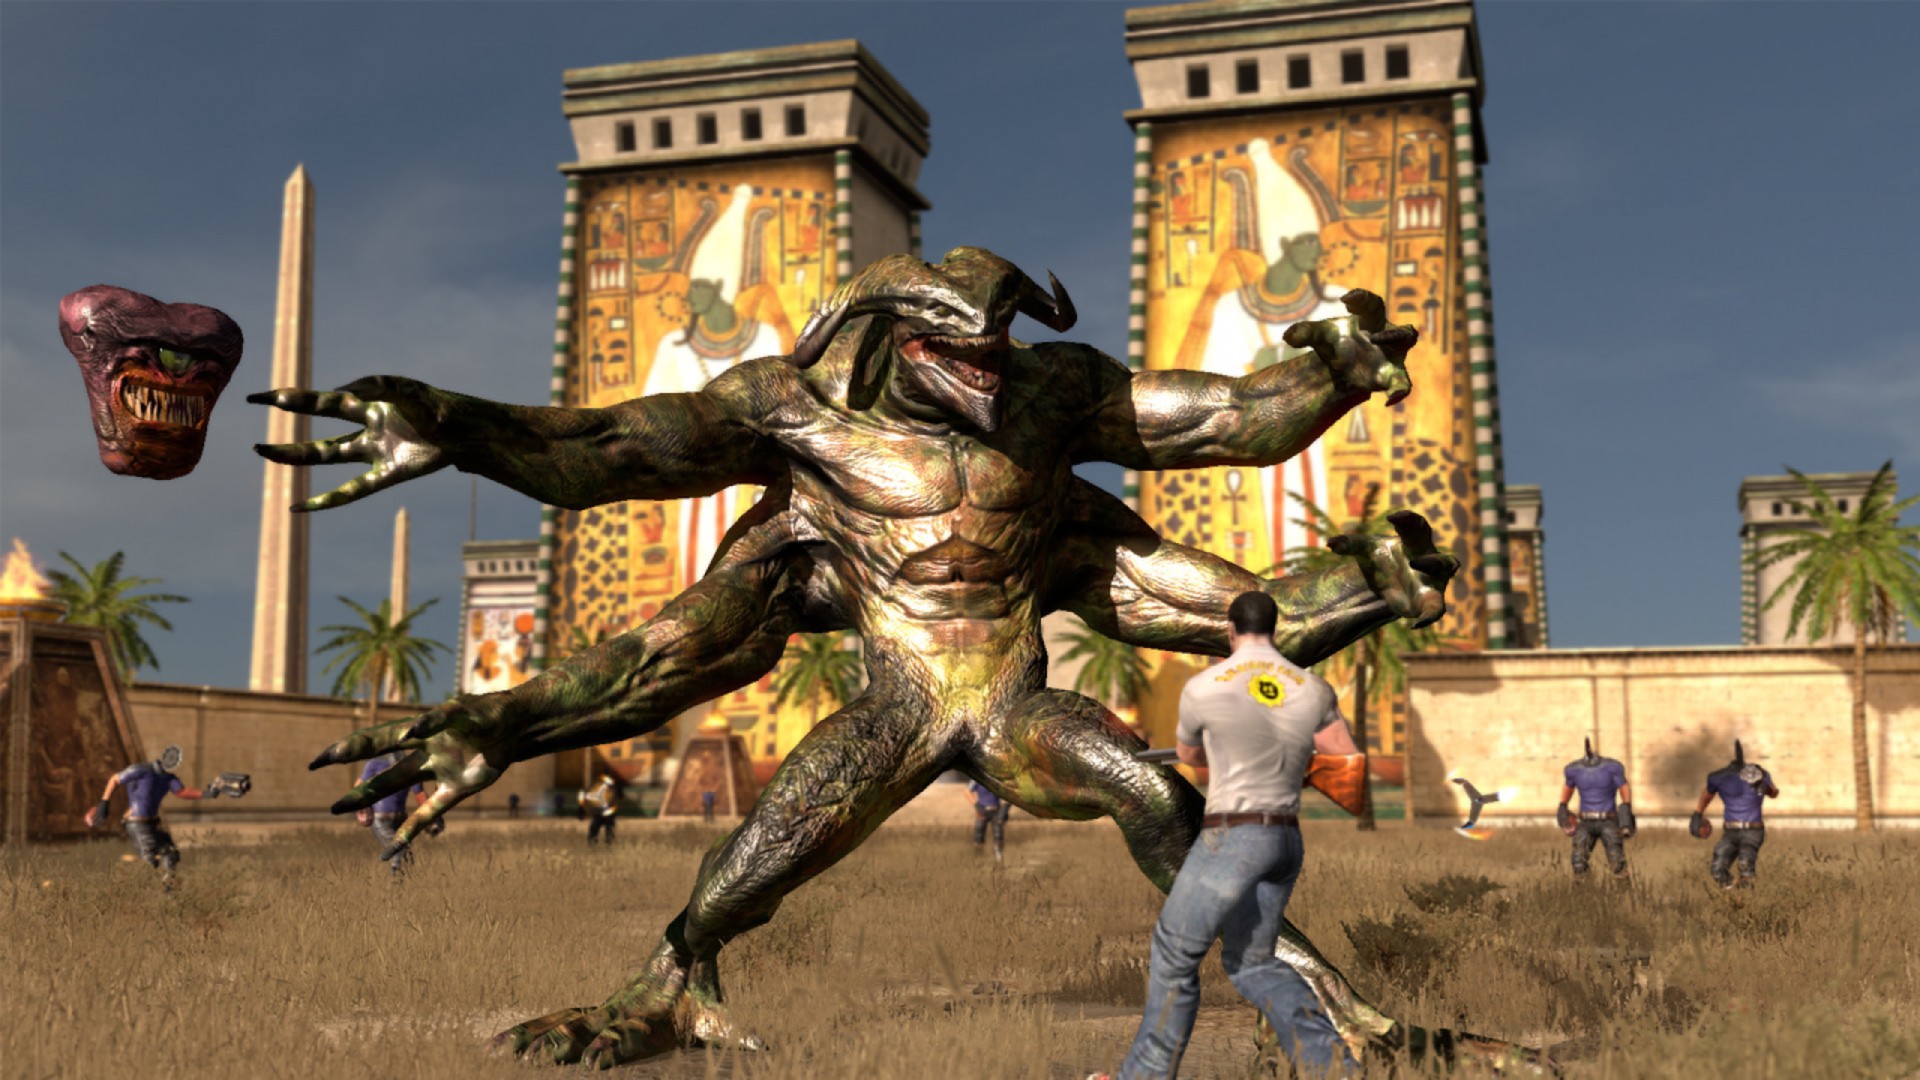 free download serious sam 2 the second encounter